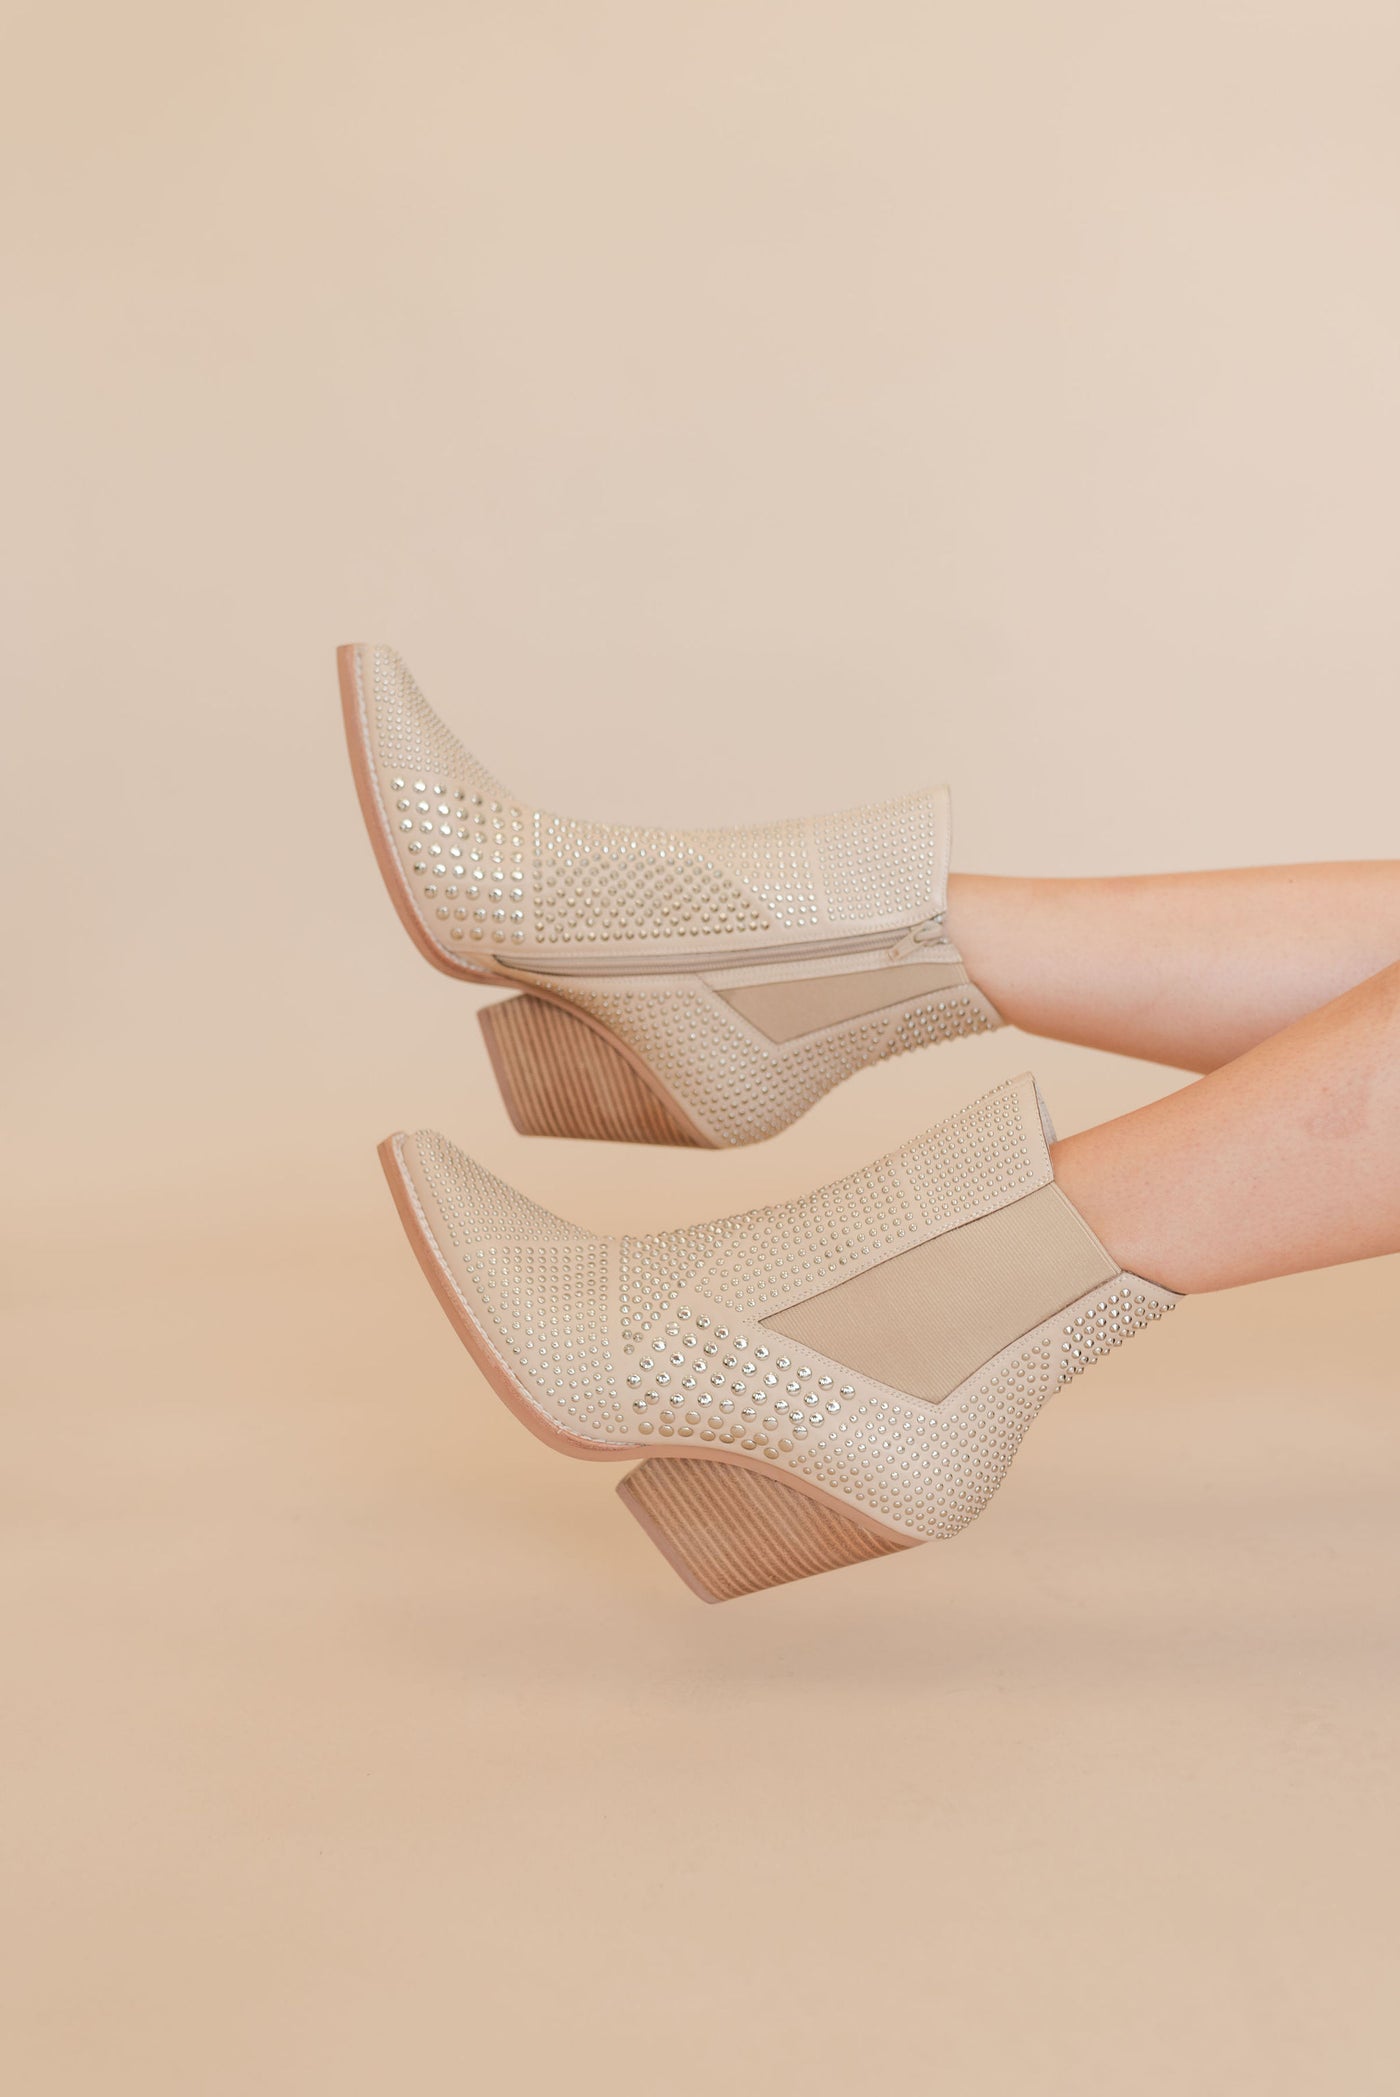 Jeffrey Campbell | STUDD-LO Bootie | Natural Silver - Poppy and Stella